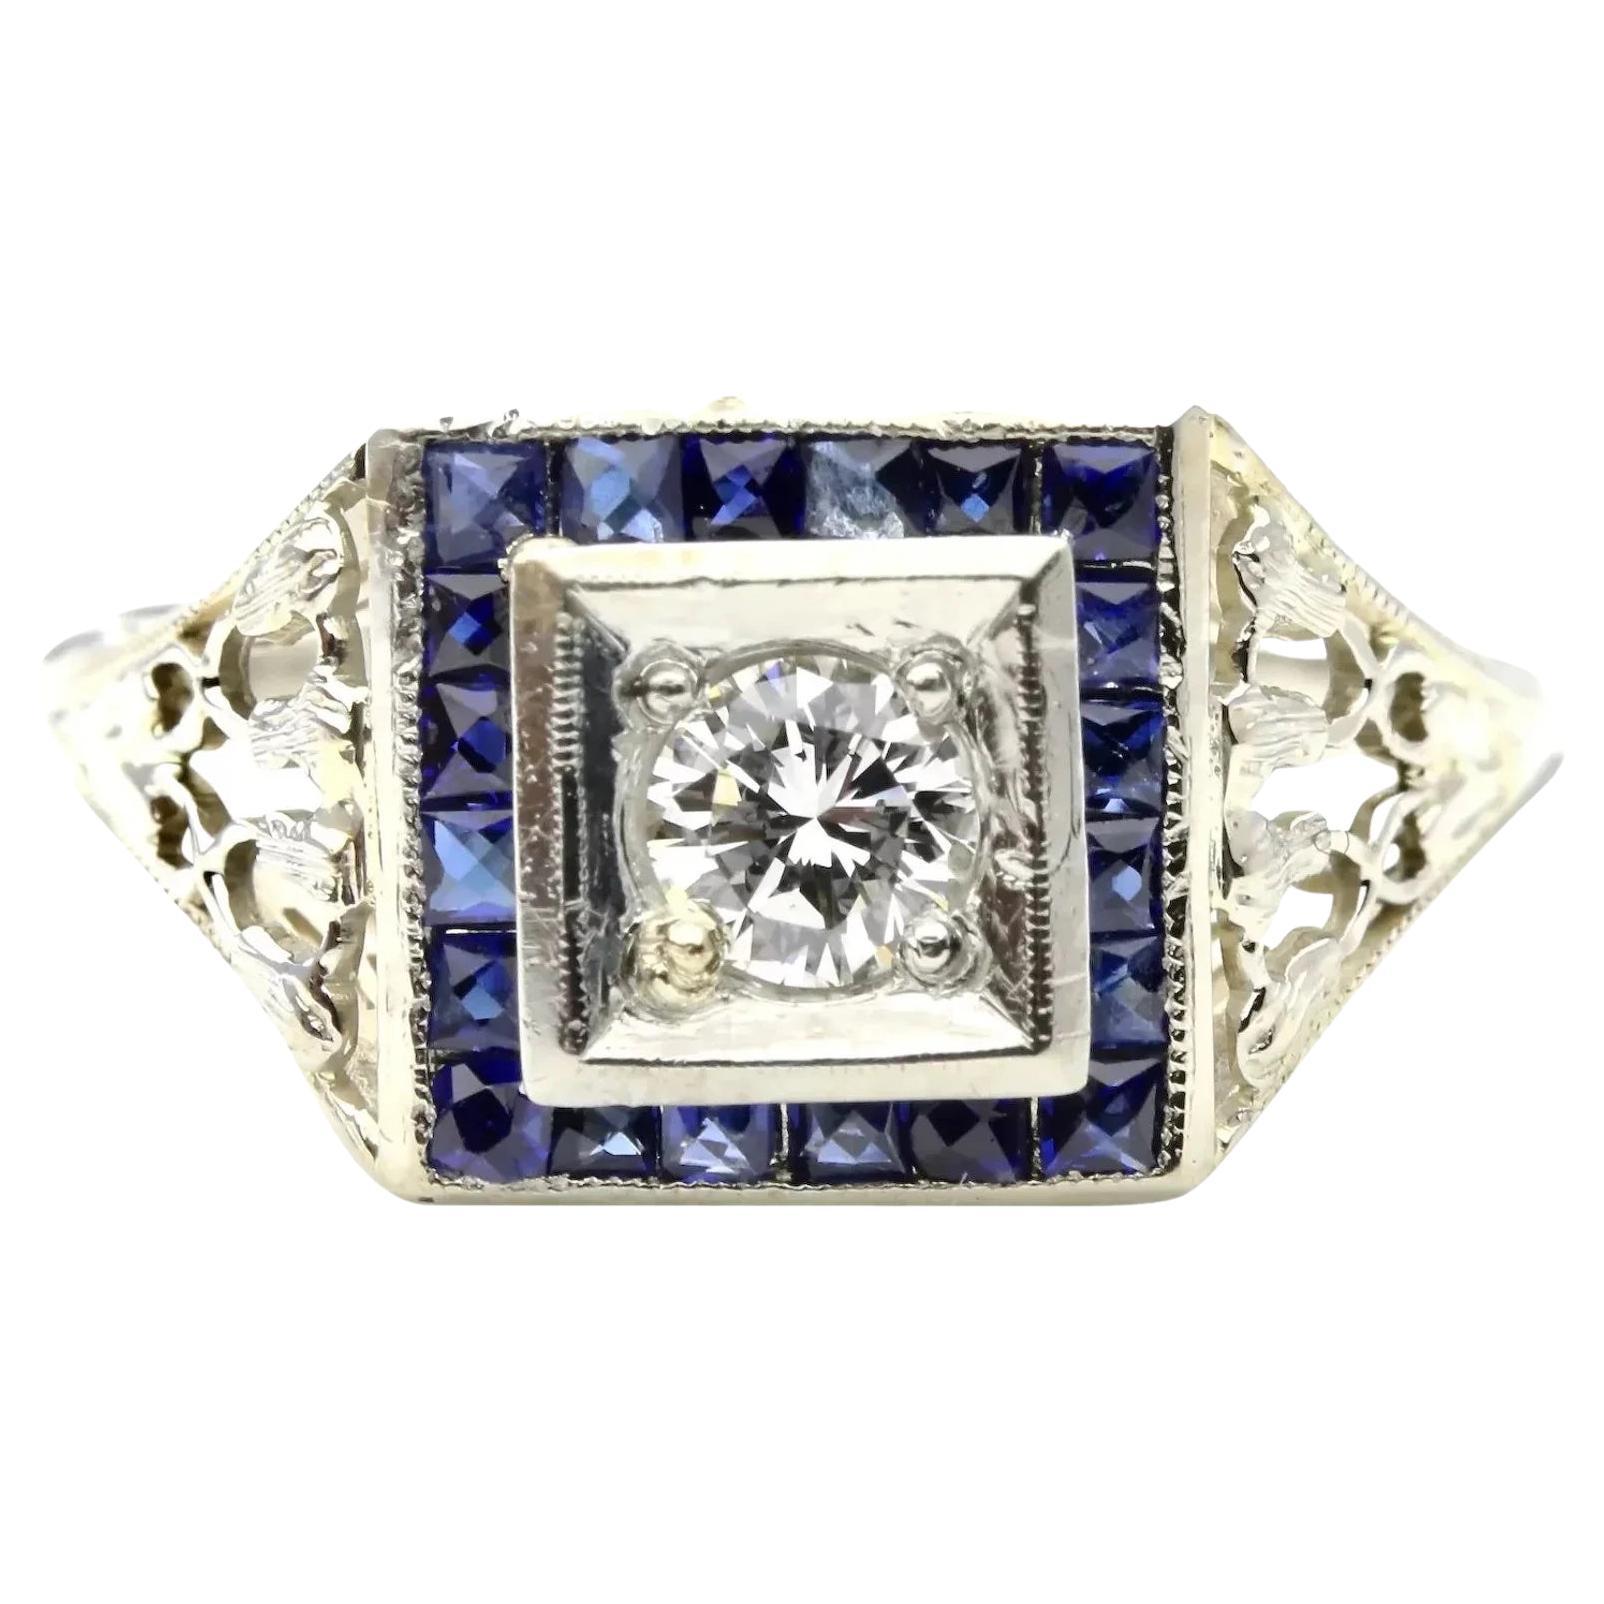 Art Deco 0.60ctw Diamond & French Cut Sapphire Halo Ring in 18K White Gold For Sale